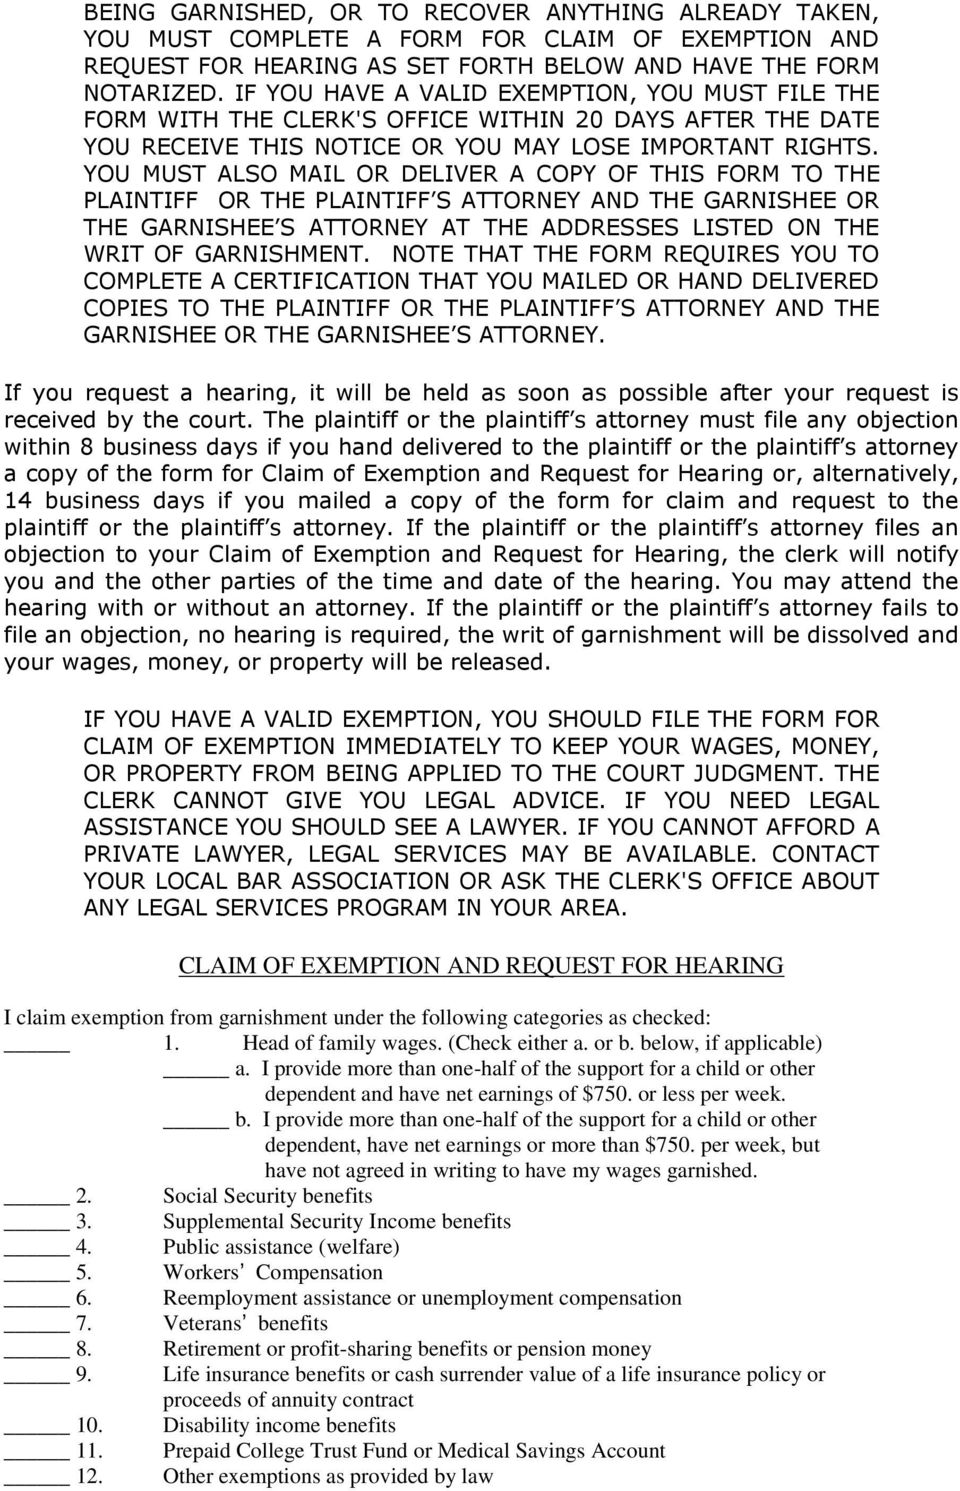 YOU MUST ALSO MAIL OR DELIVER A COPY OF THIS FORM TO THE PLAINTIFF OR THE PLAINTIFF S ATTORNEY AND THE GARNISHEE OR THE GARNISHEE S ATTORNEY AT THE ADDRESSES LISTED ON THE WRIT OF GARNISHMENT.